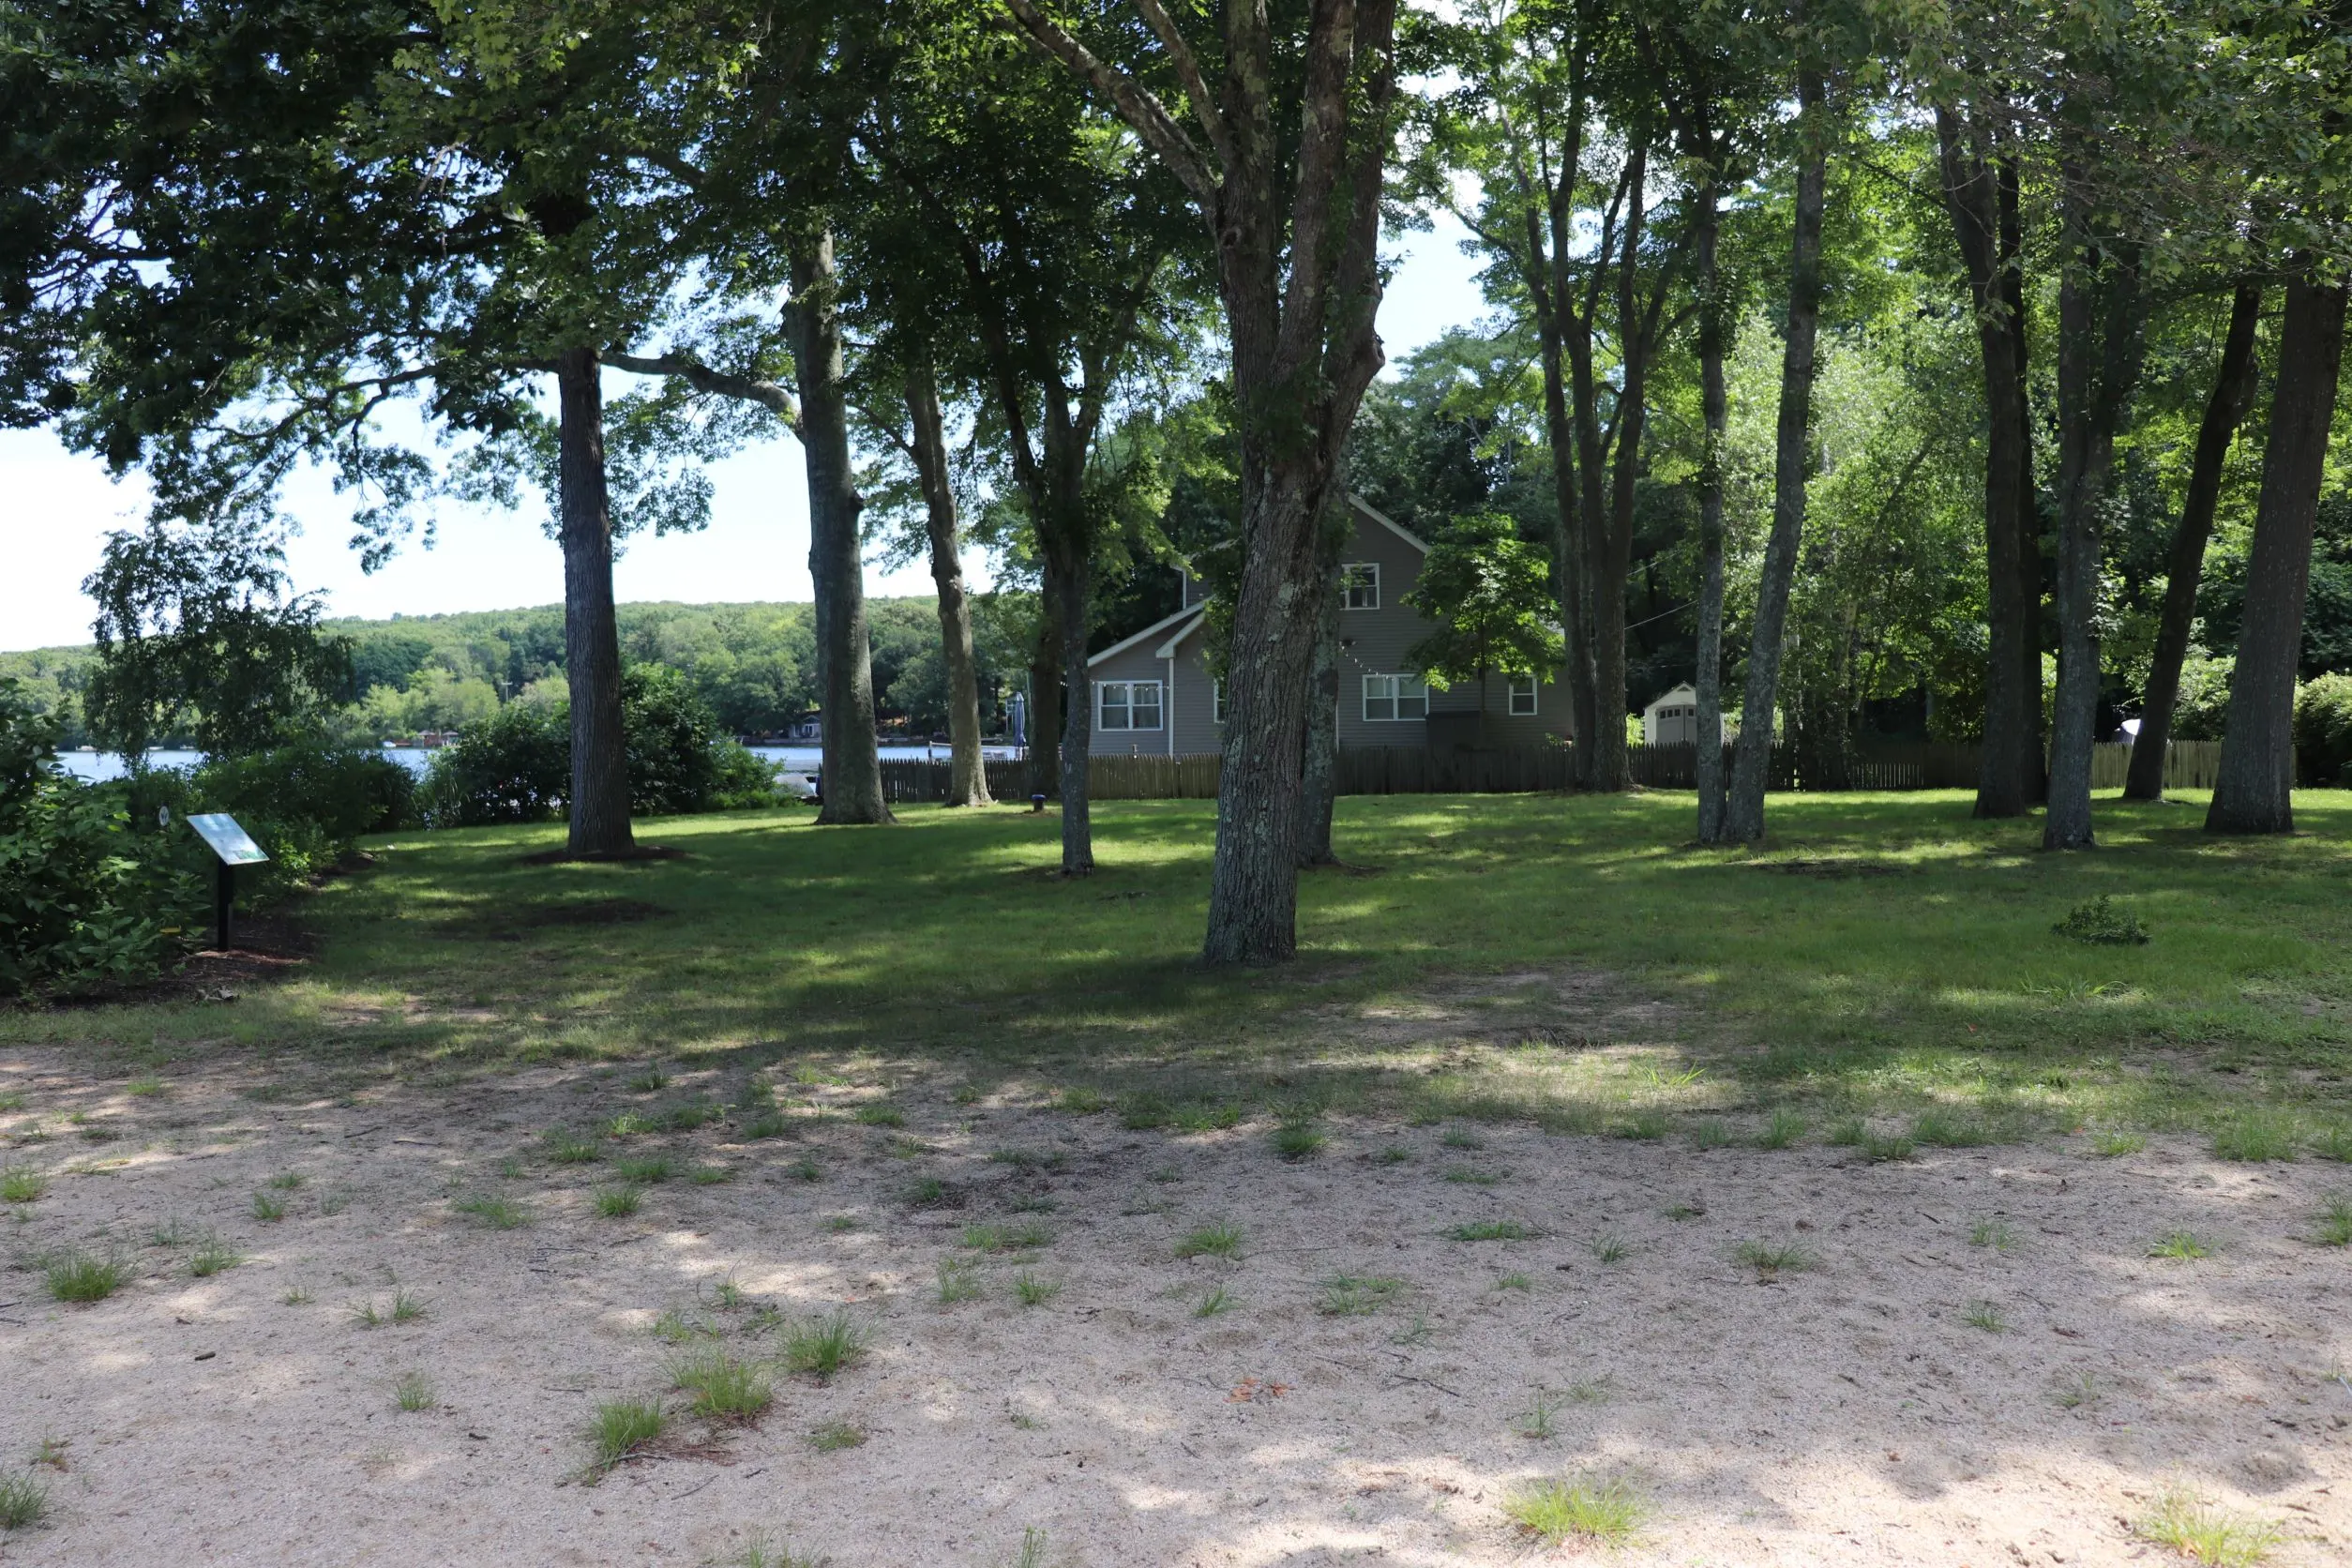 Image of shaded area in Haines Park in Old Lyme, CT.